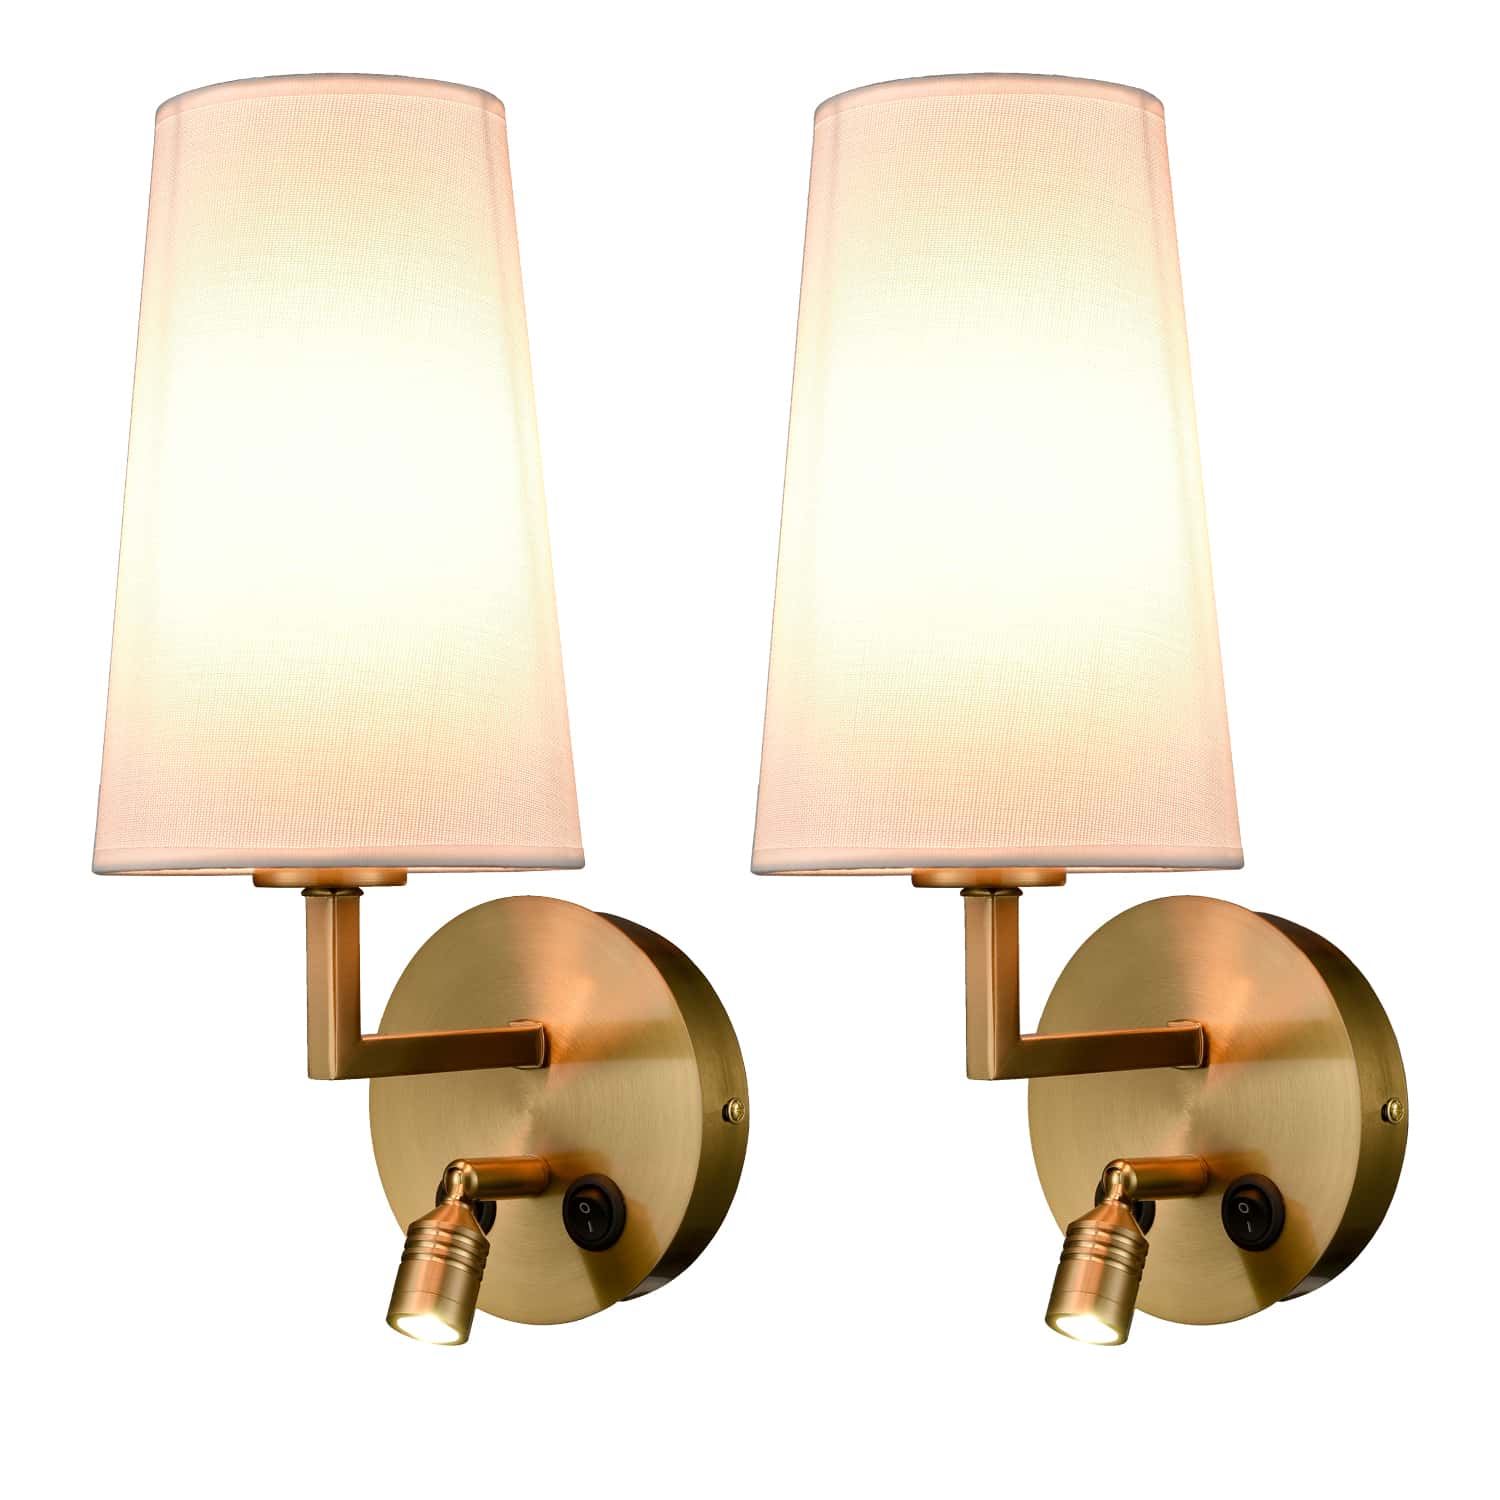 Brass Wall Sconce Set of 2 Fabric Wall Lamp with USB Port and Switch